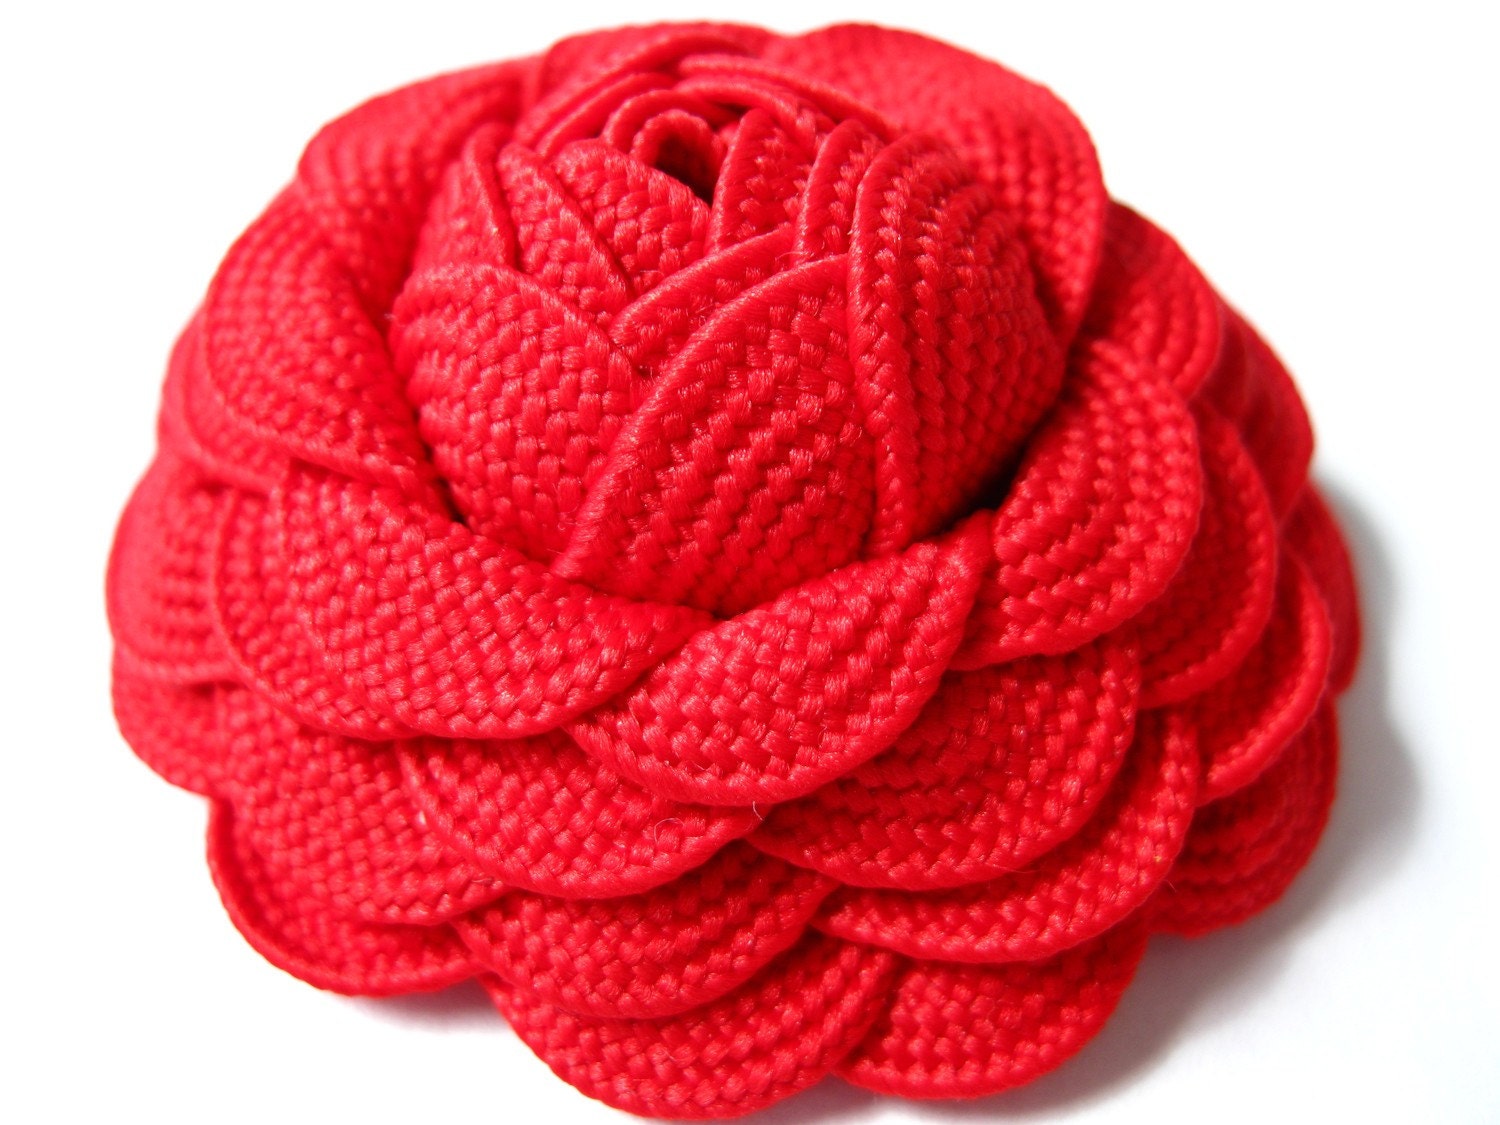 Unique Rose Accessory Hair or Brooch Flower : Red Rose Art Deco Rick Rack Flower - Unique Handmade Hair Accessory or Brooch Bridesmaid - Rotifera